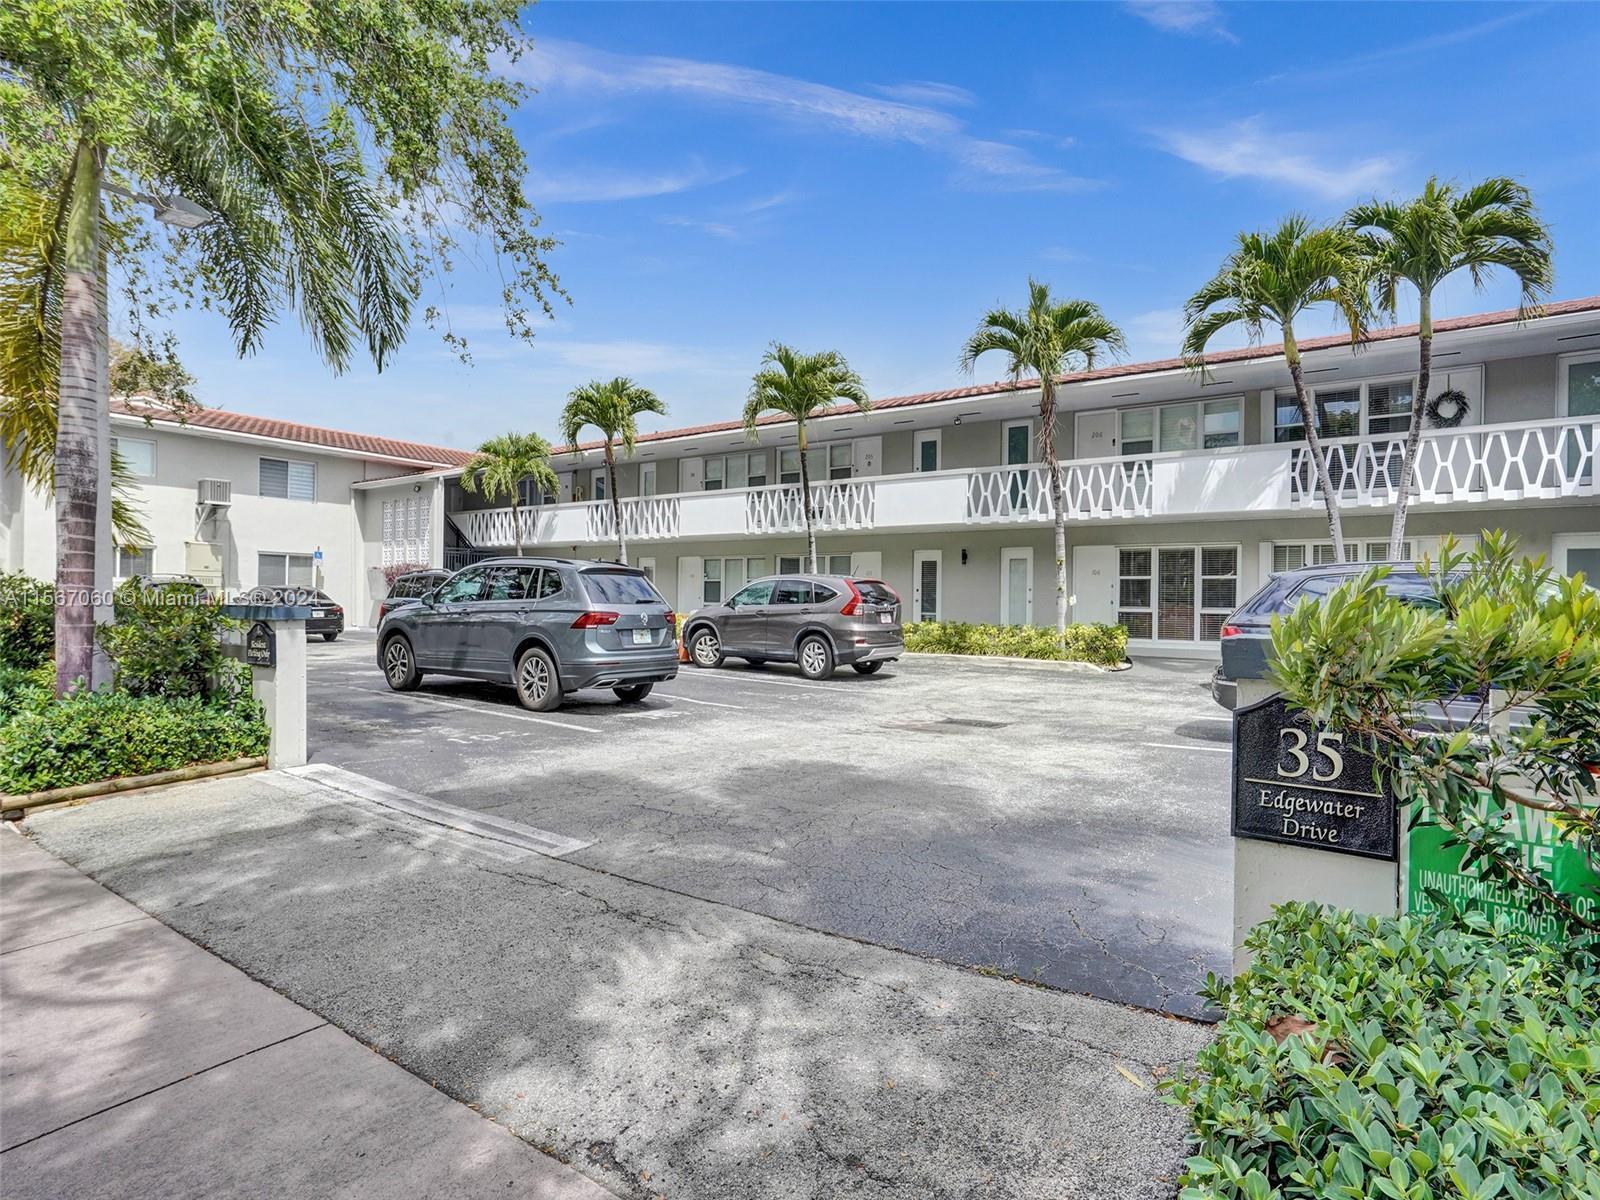 Photo of 35 Edgewater Dr #202 in Coral Gables, FL